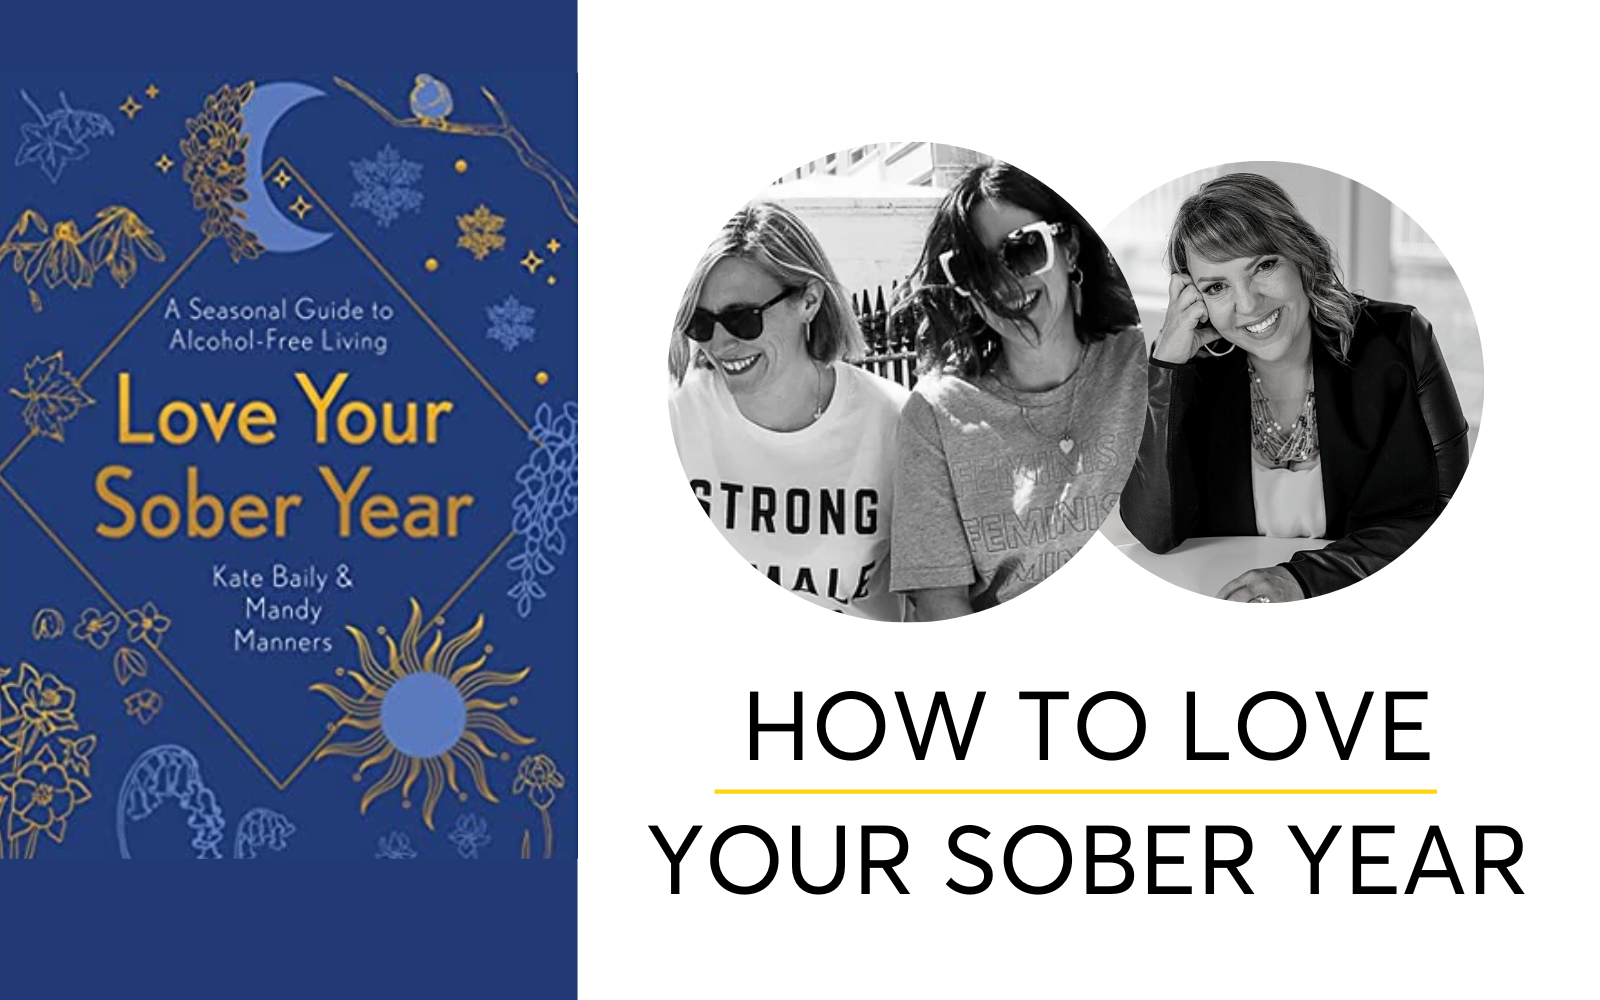 How To Love Your Sober Year